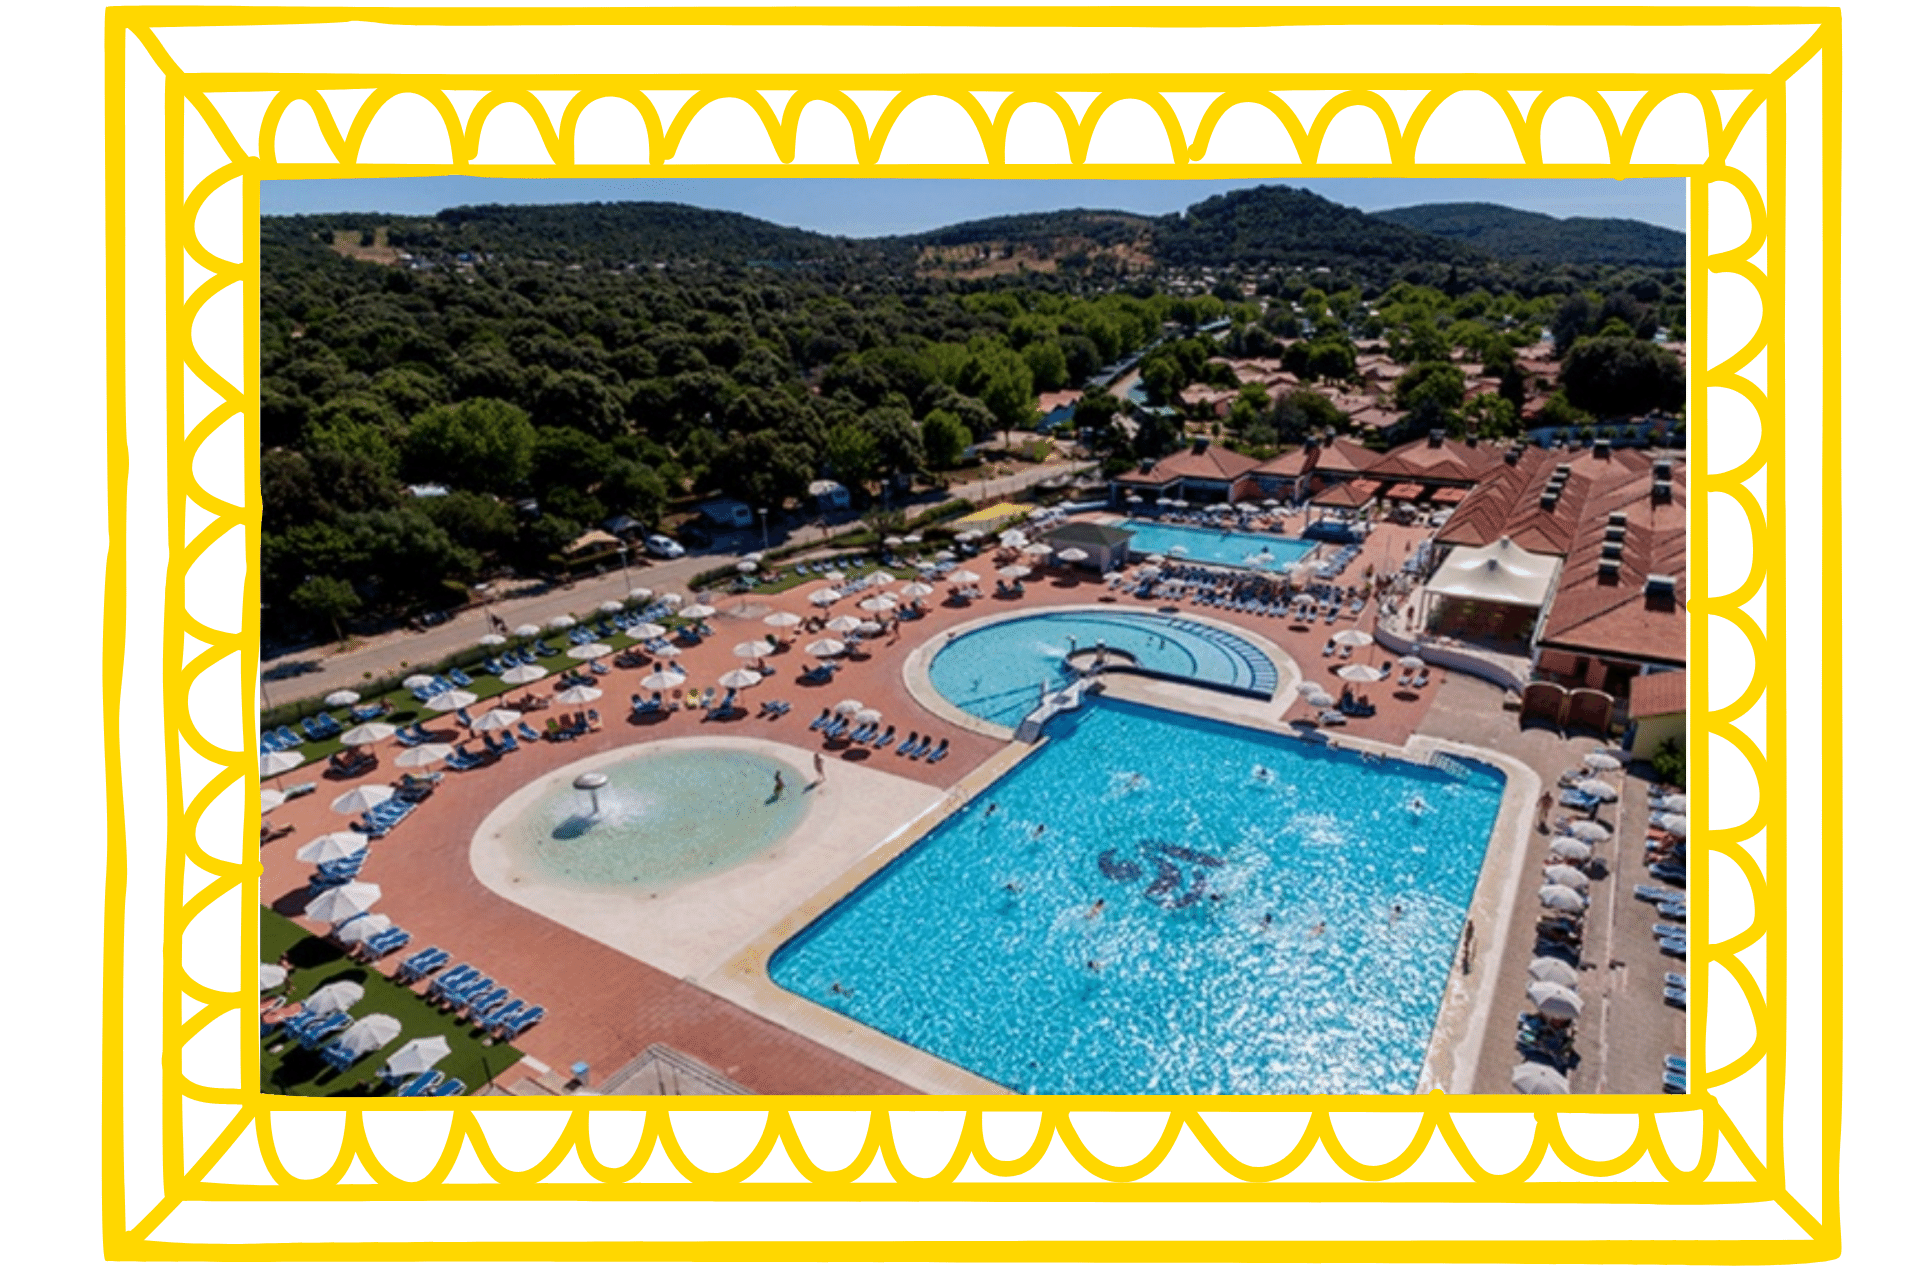 Valalta is a large nudist camp in Croatia, with one of the world's best nudist beaches. Image shows a bird's eye view of the outdoor pools at Valalta, with sunloungers around them and green mountains reaching into the distance.